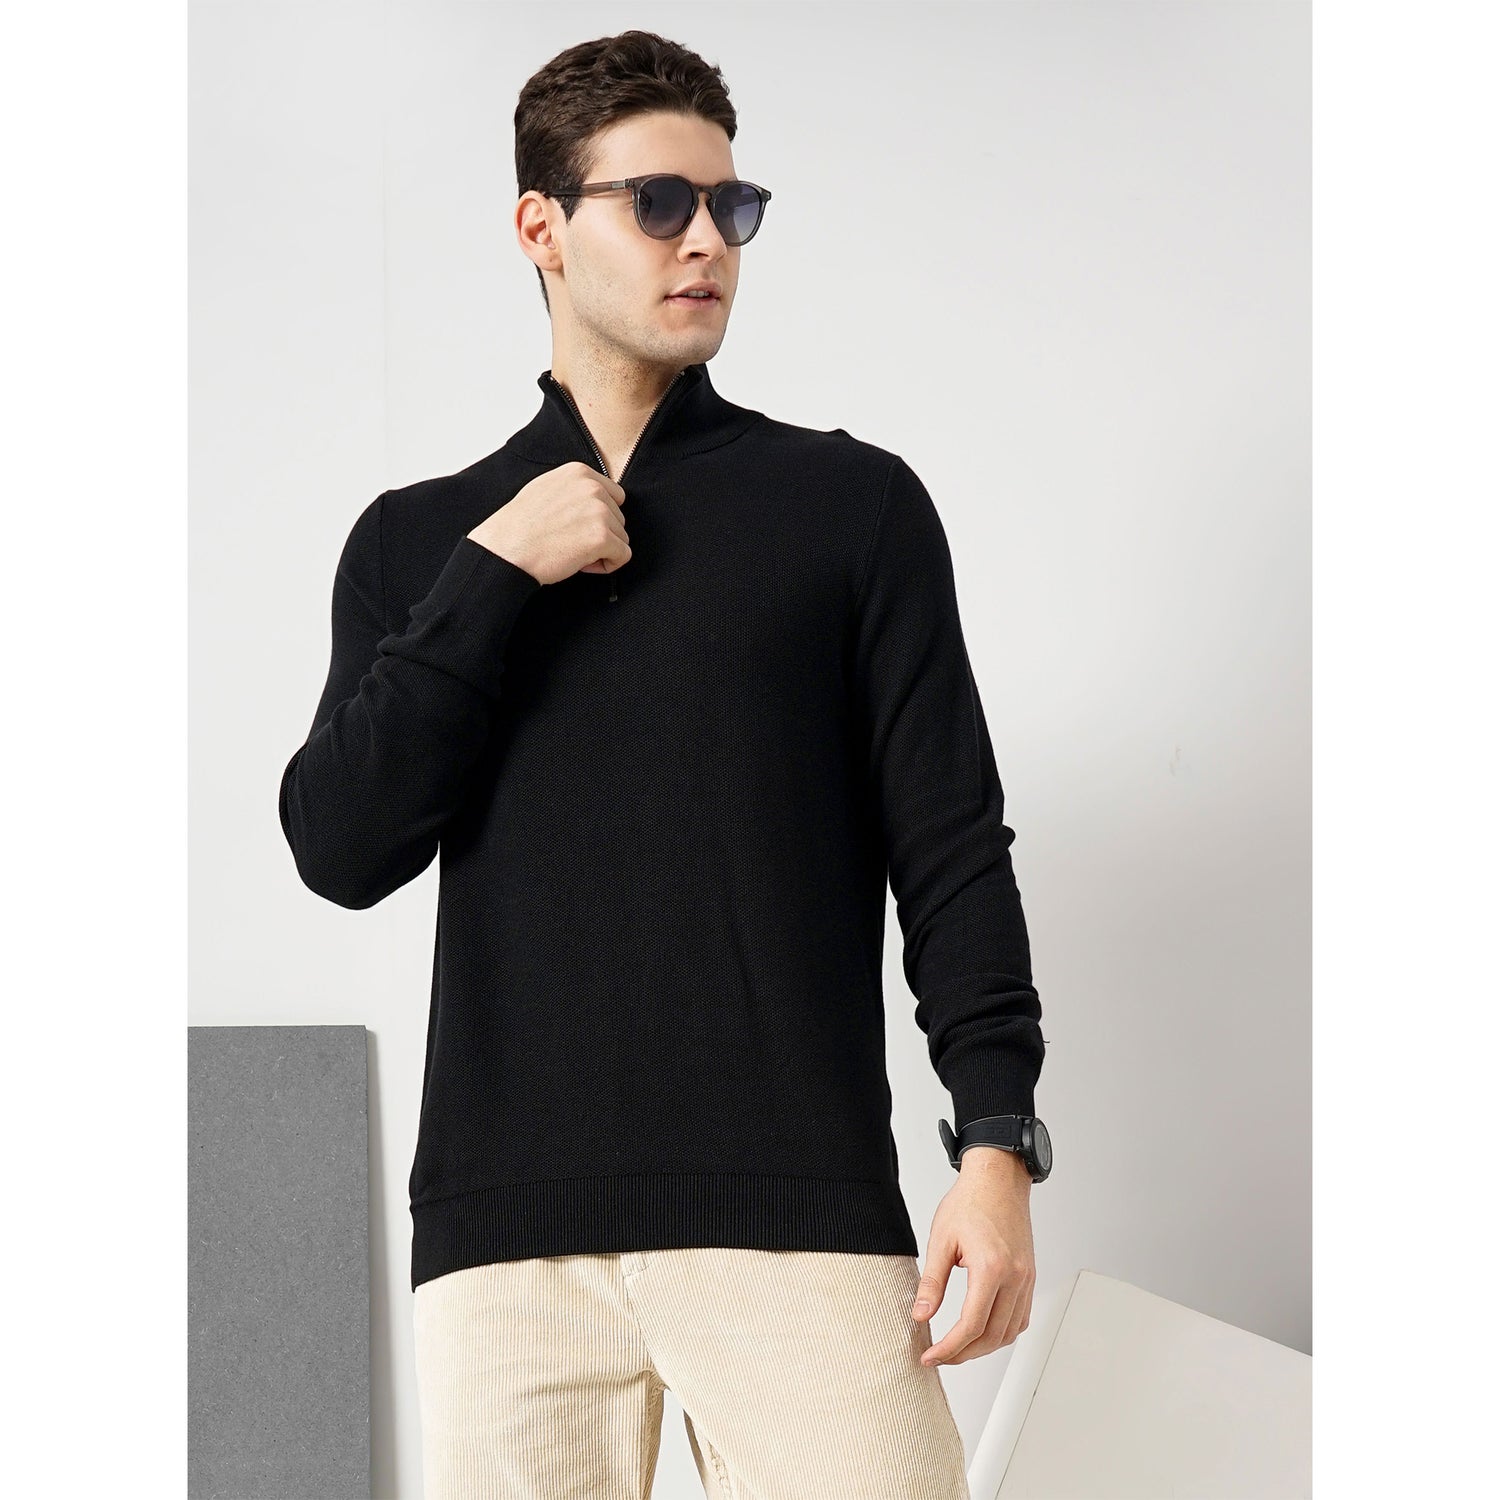 Cotton Black Solid Sweater